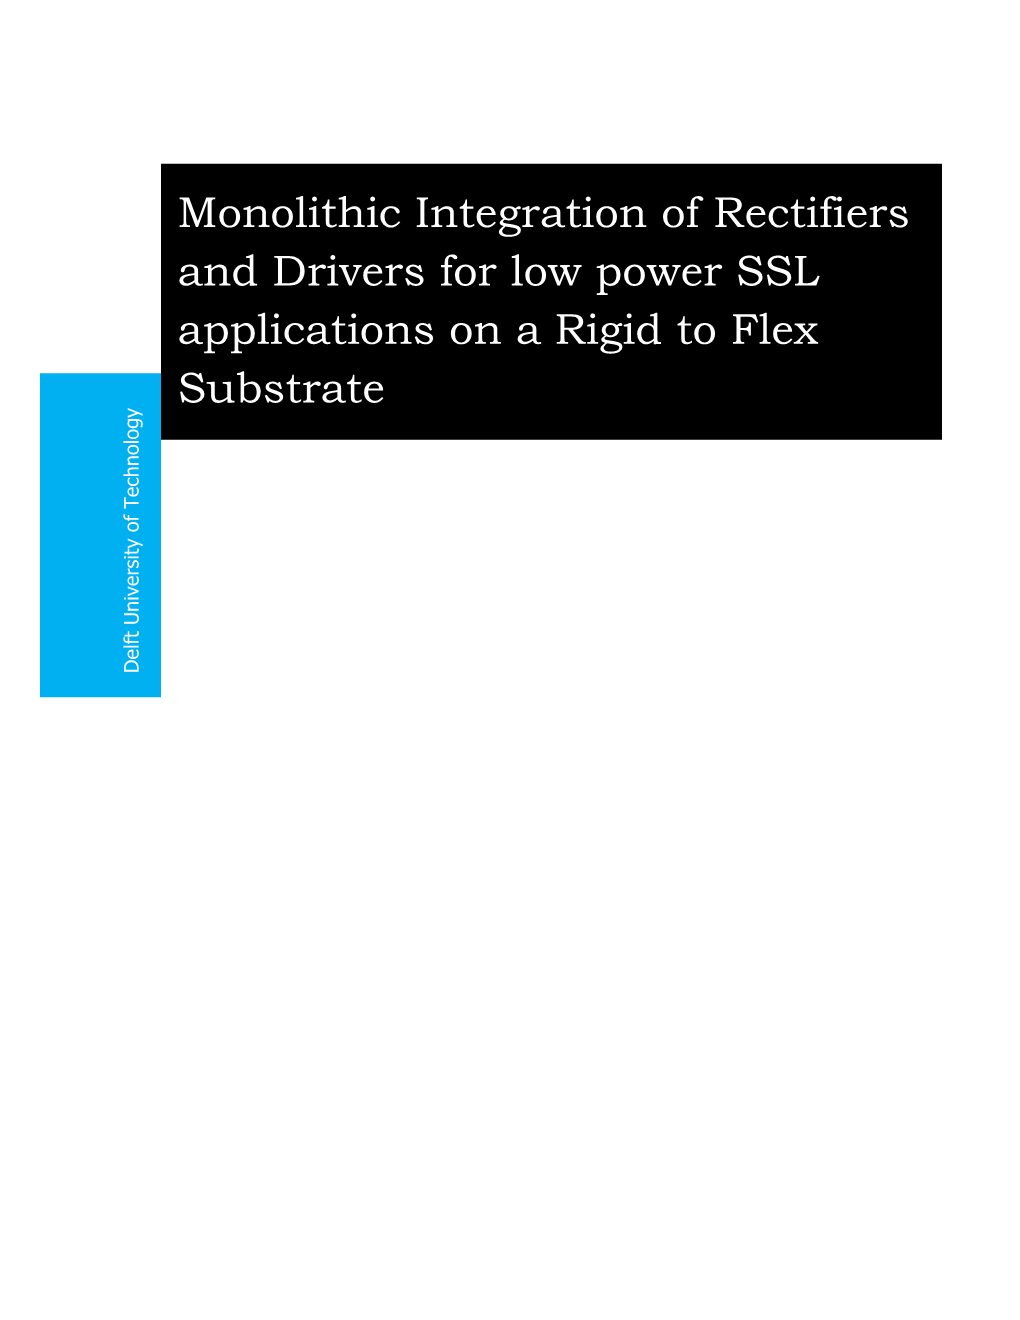 Monolithic Integration of Rectifiers and Drivers for Low Power SSL Applications on a Rigid to Flex